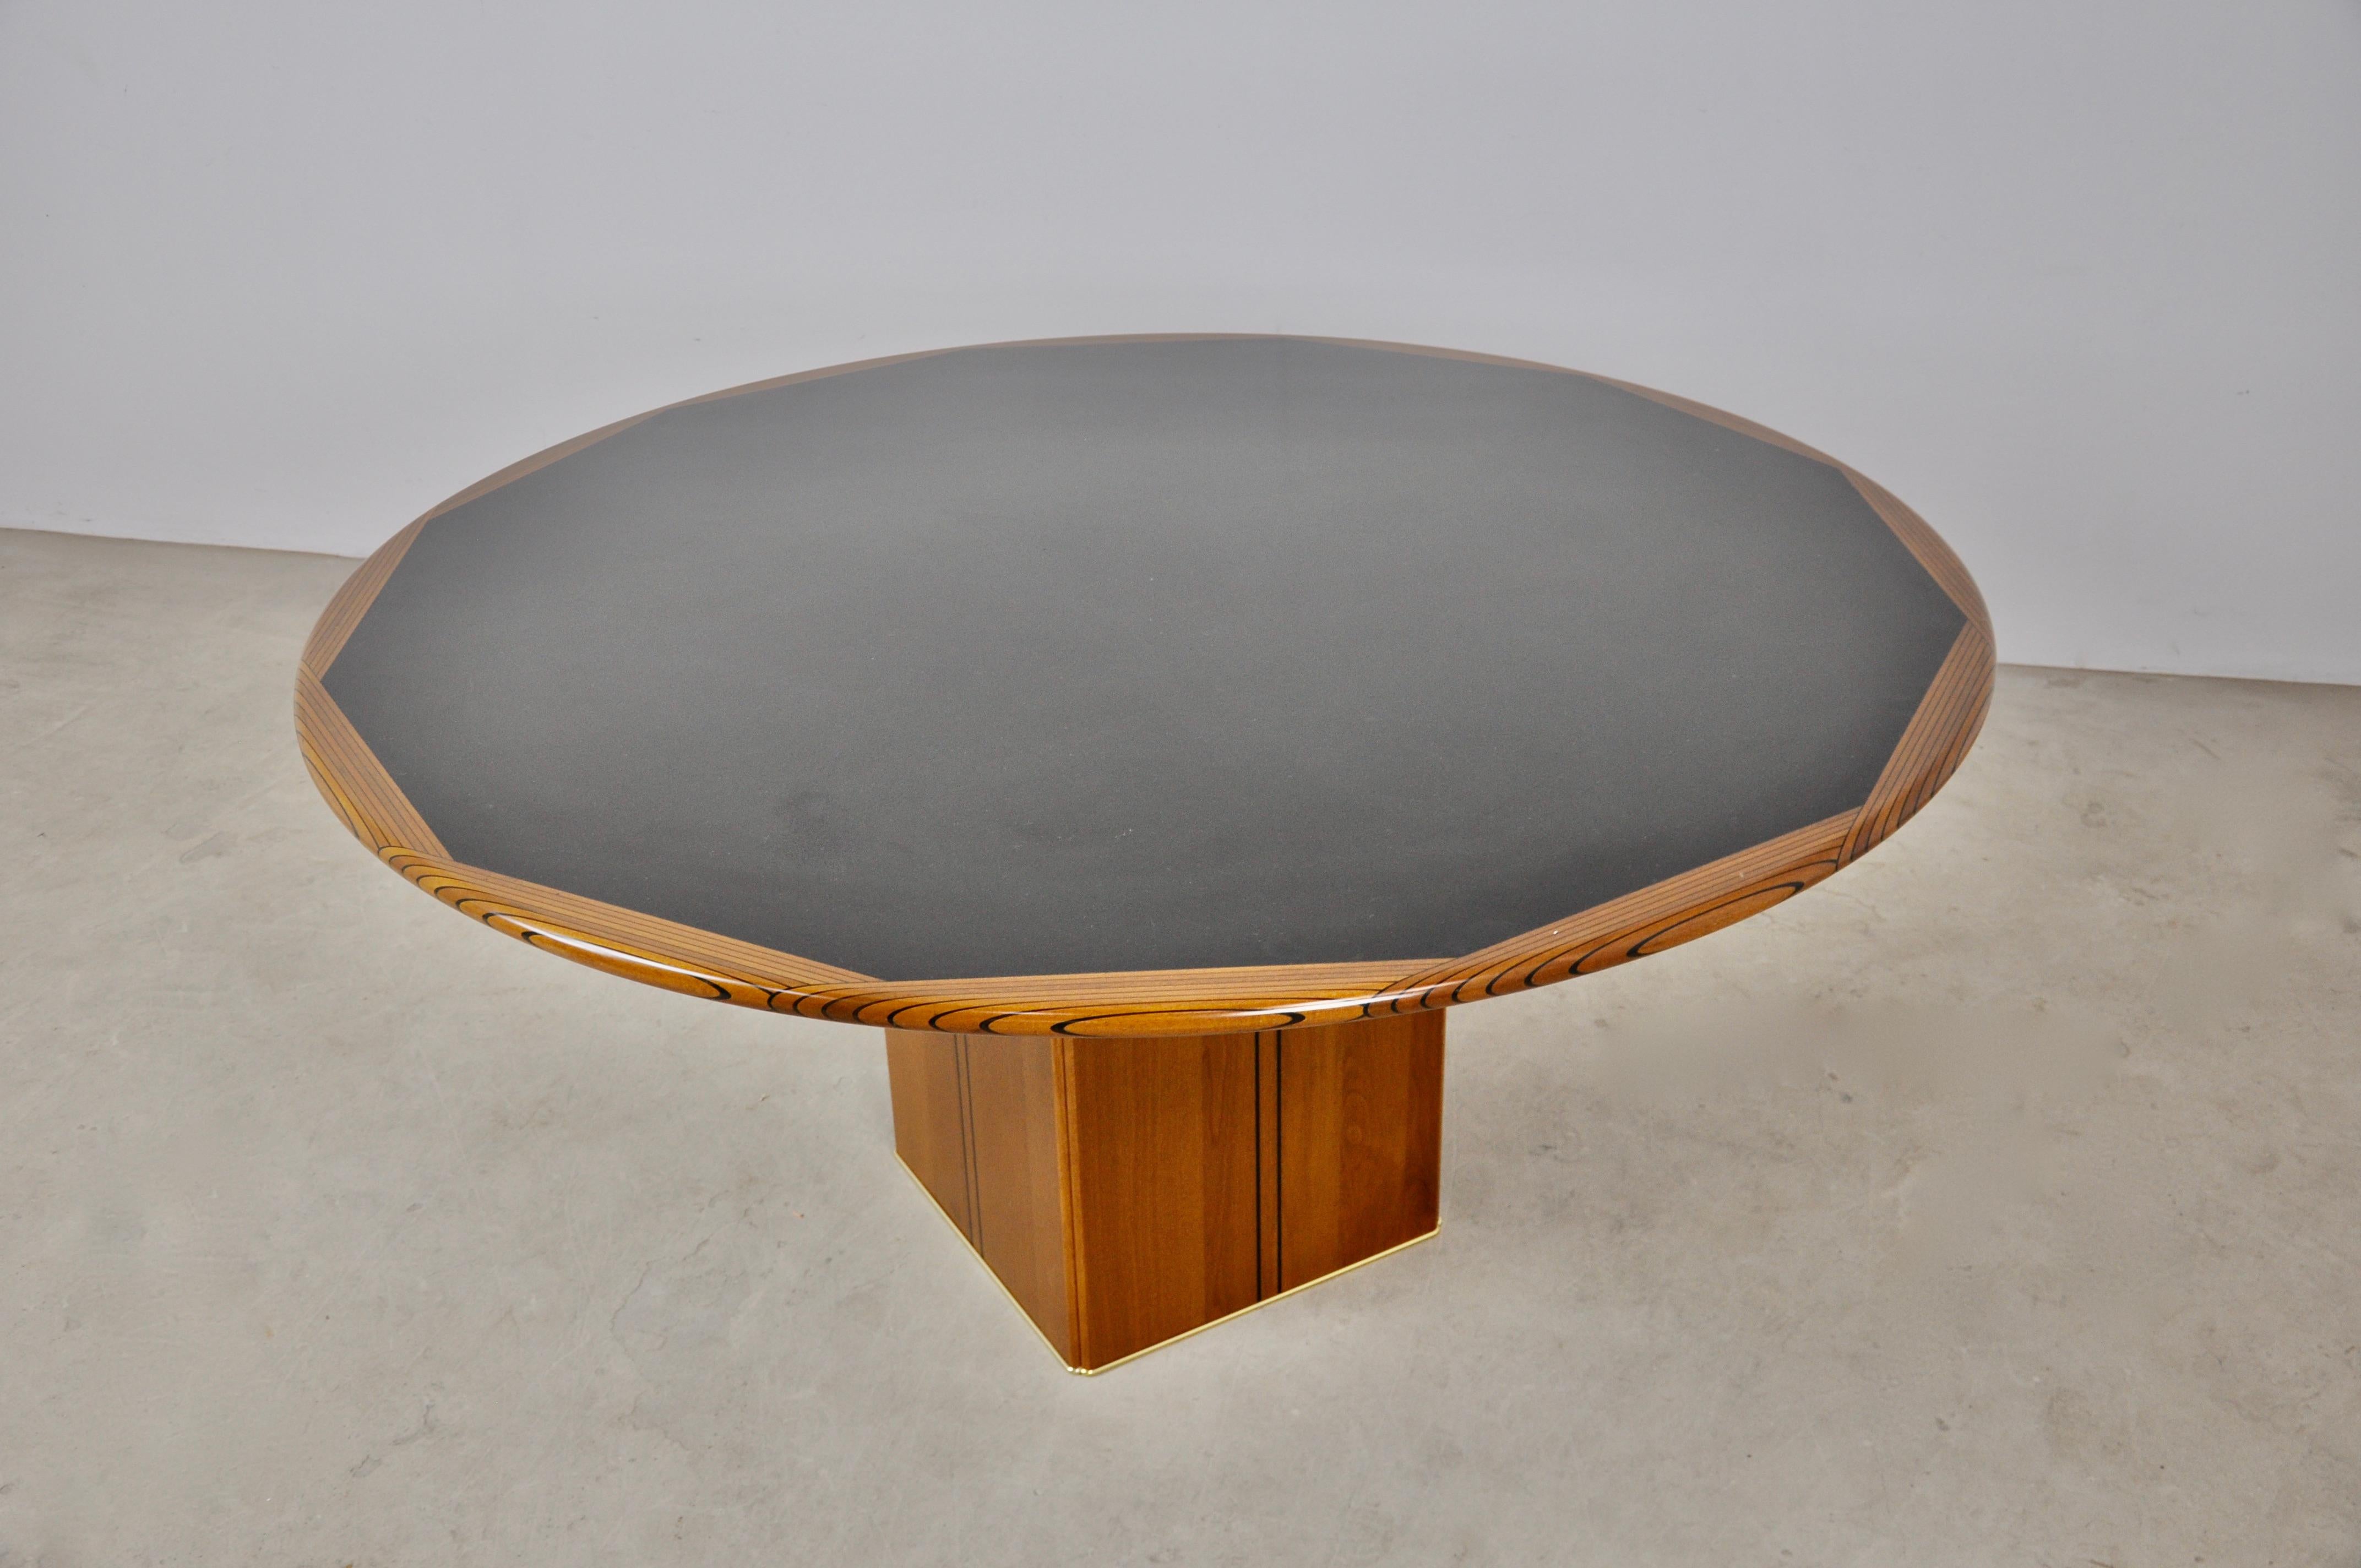 Round wooden table. By Tobia&Afra Scarpa. Concrete block inside the table for stability stamped.